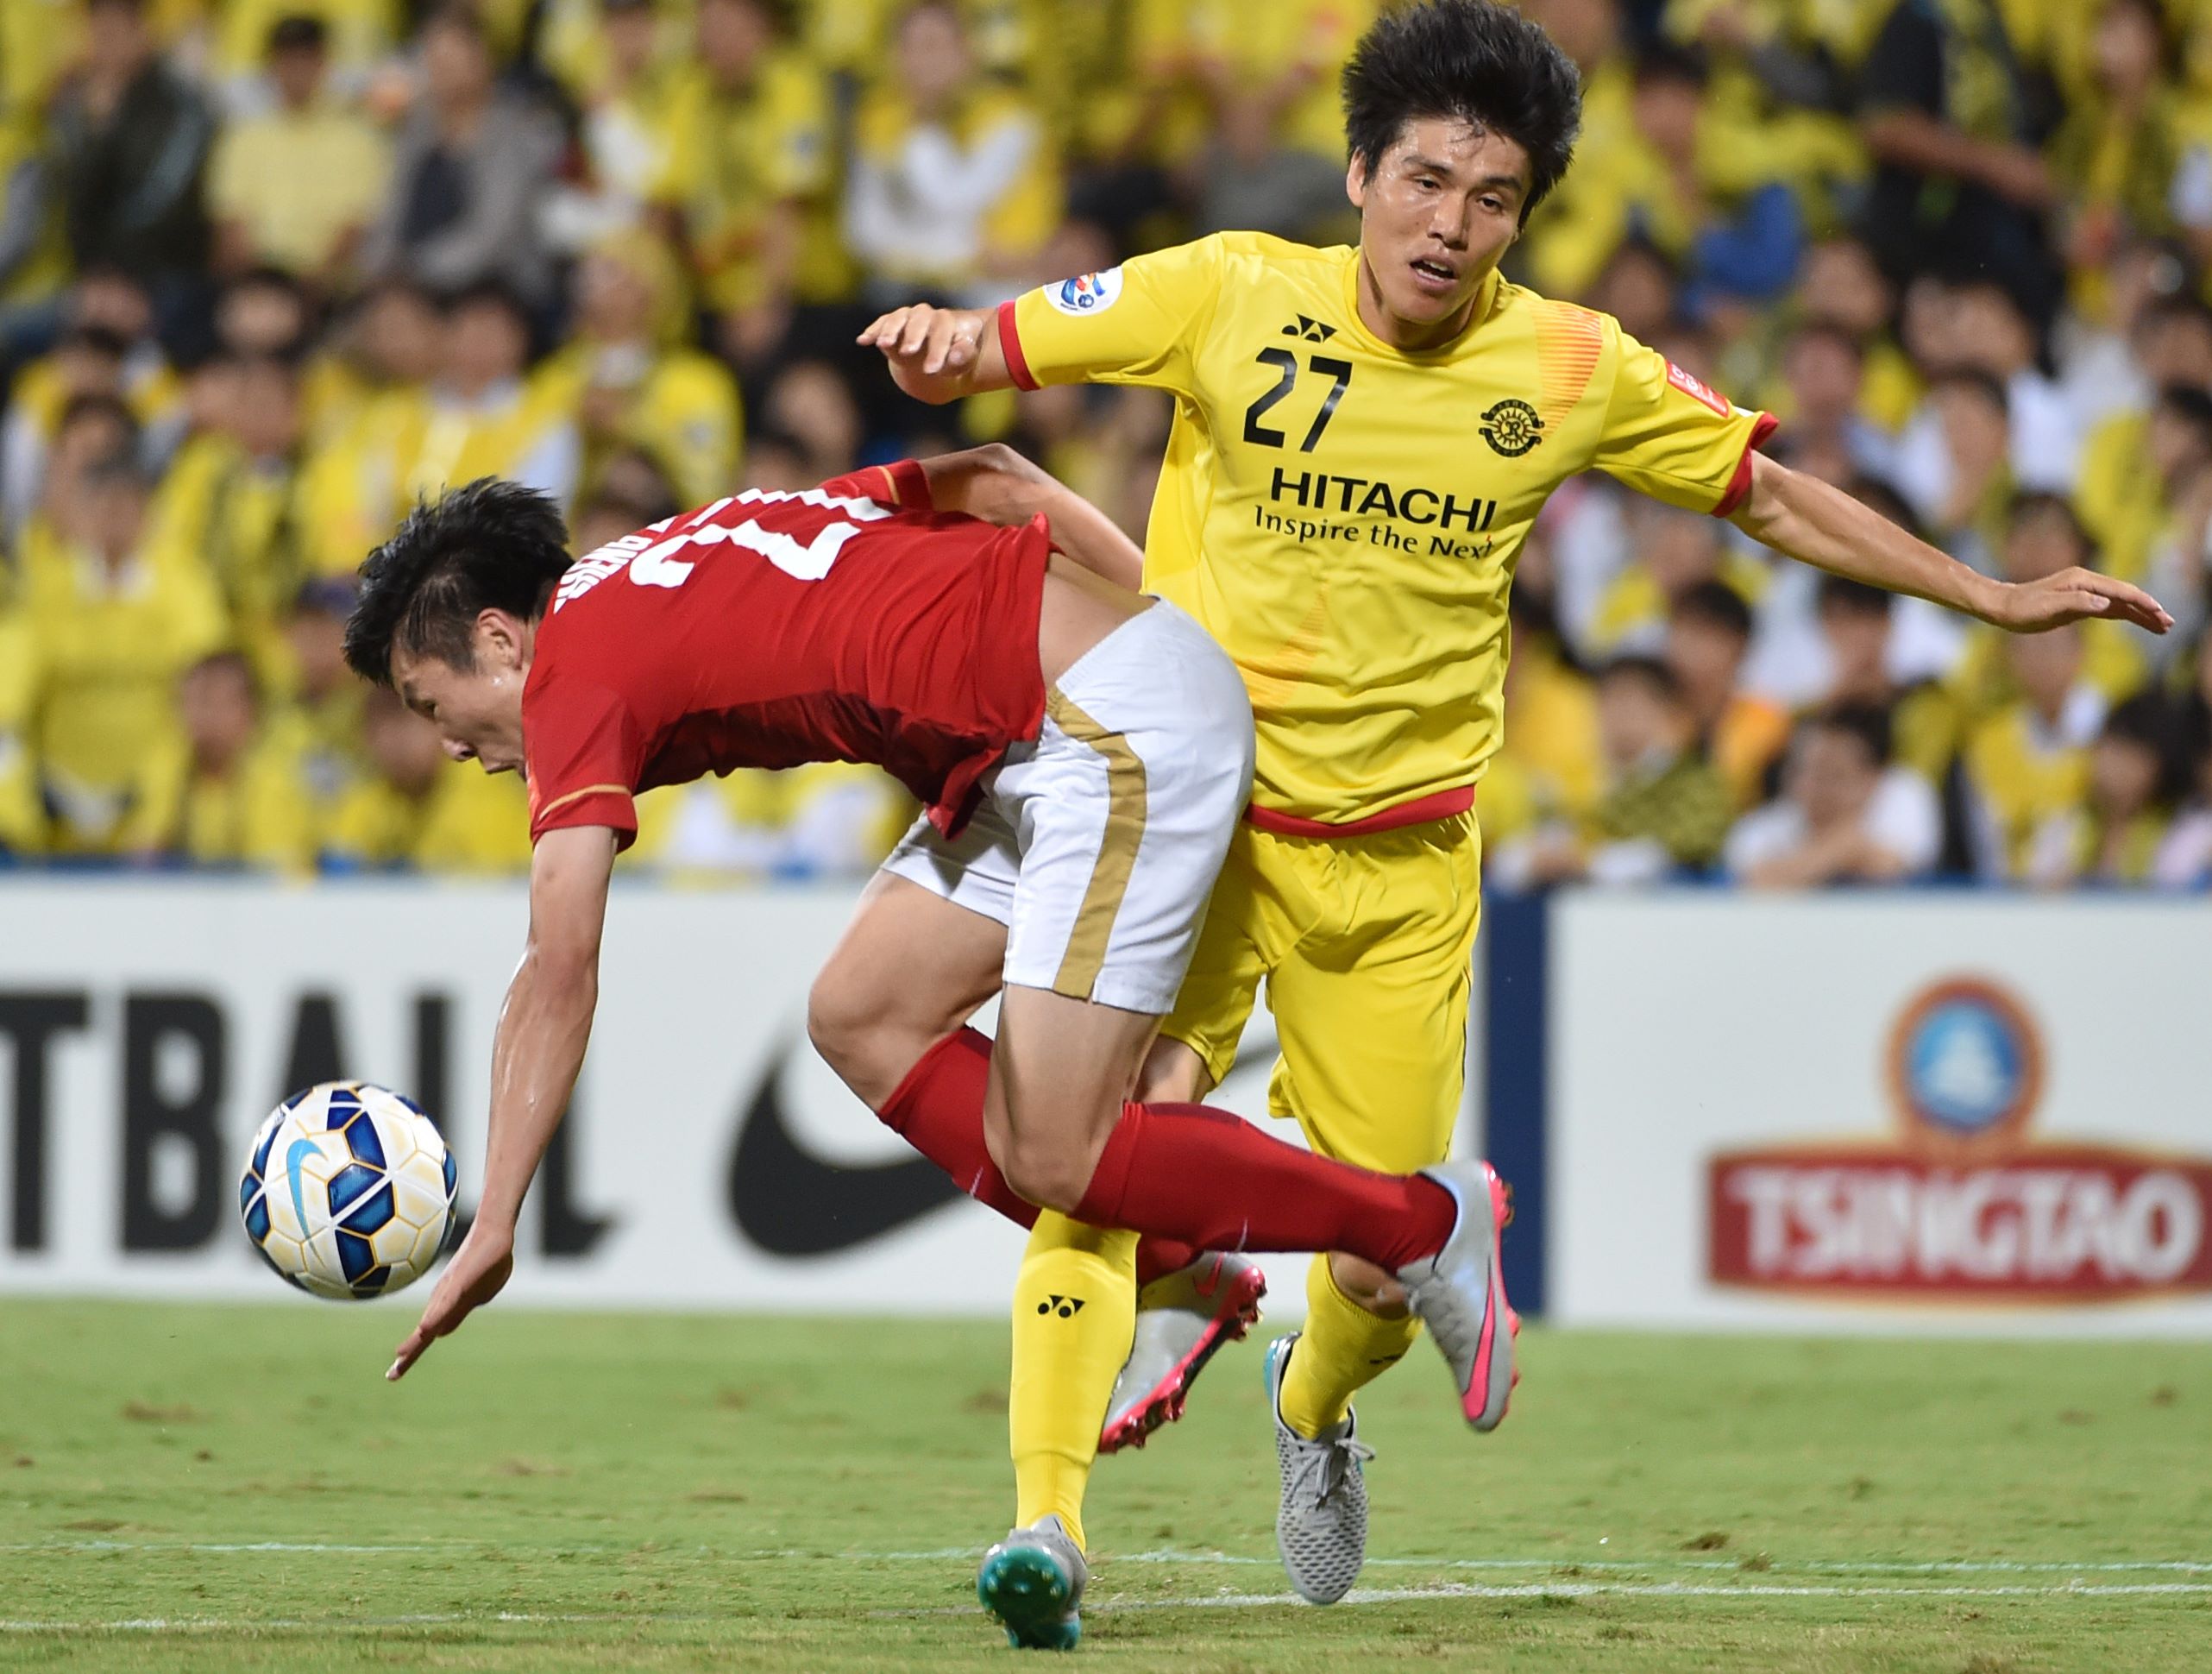 Guangzhou Evergrande midfielder Zheng Long, left, fights for the ball durjng an AFC Champions League quarterfinal match last month. Alibaba founder Jack Ma Yun bought 40 per cent of the team last year after getting drunk with its owner. He now has bigger plans for China's sports industry. Photo: AFP